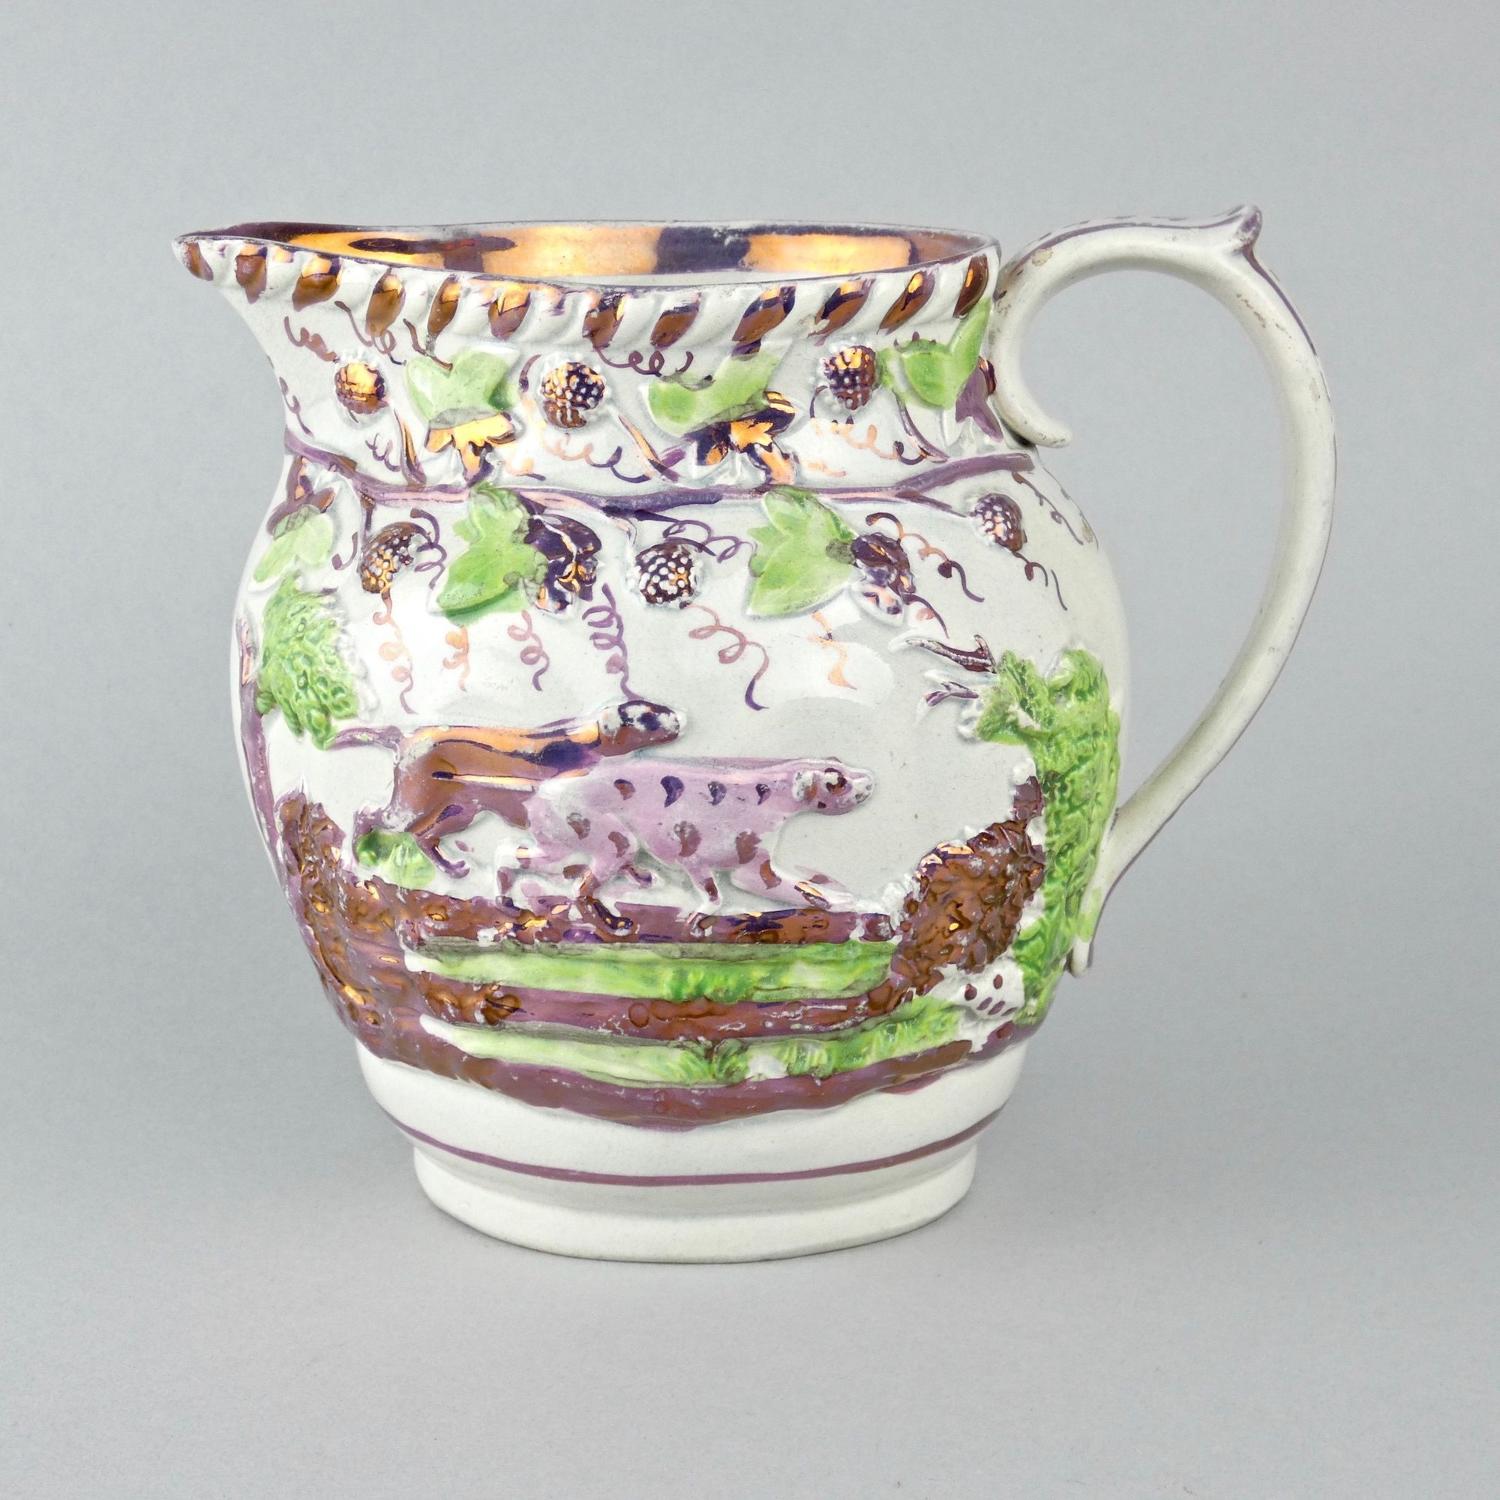 Pink lustre jug moulded with dogs.